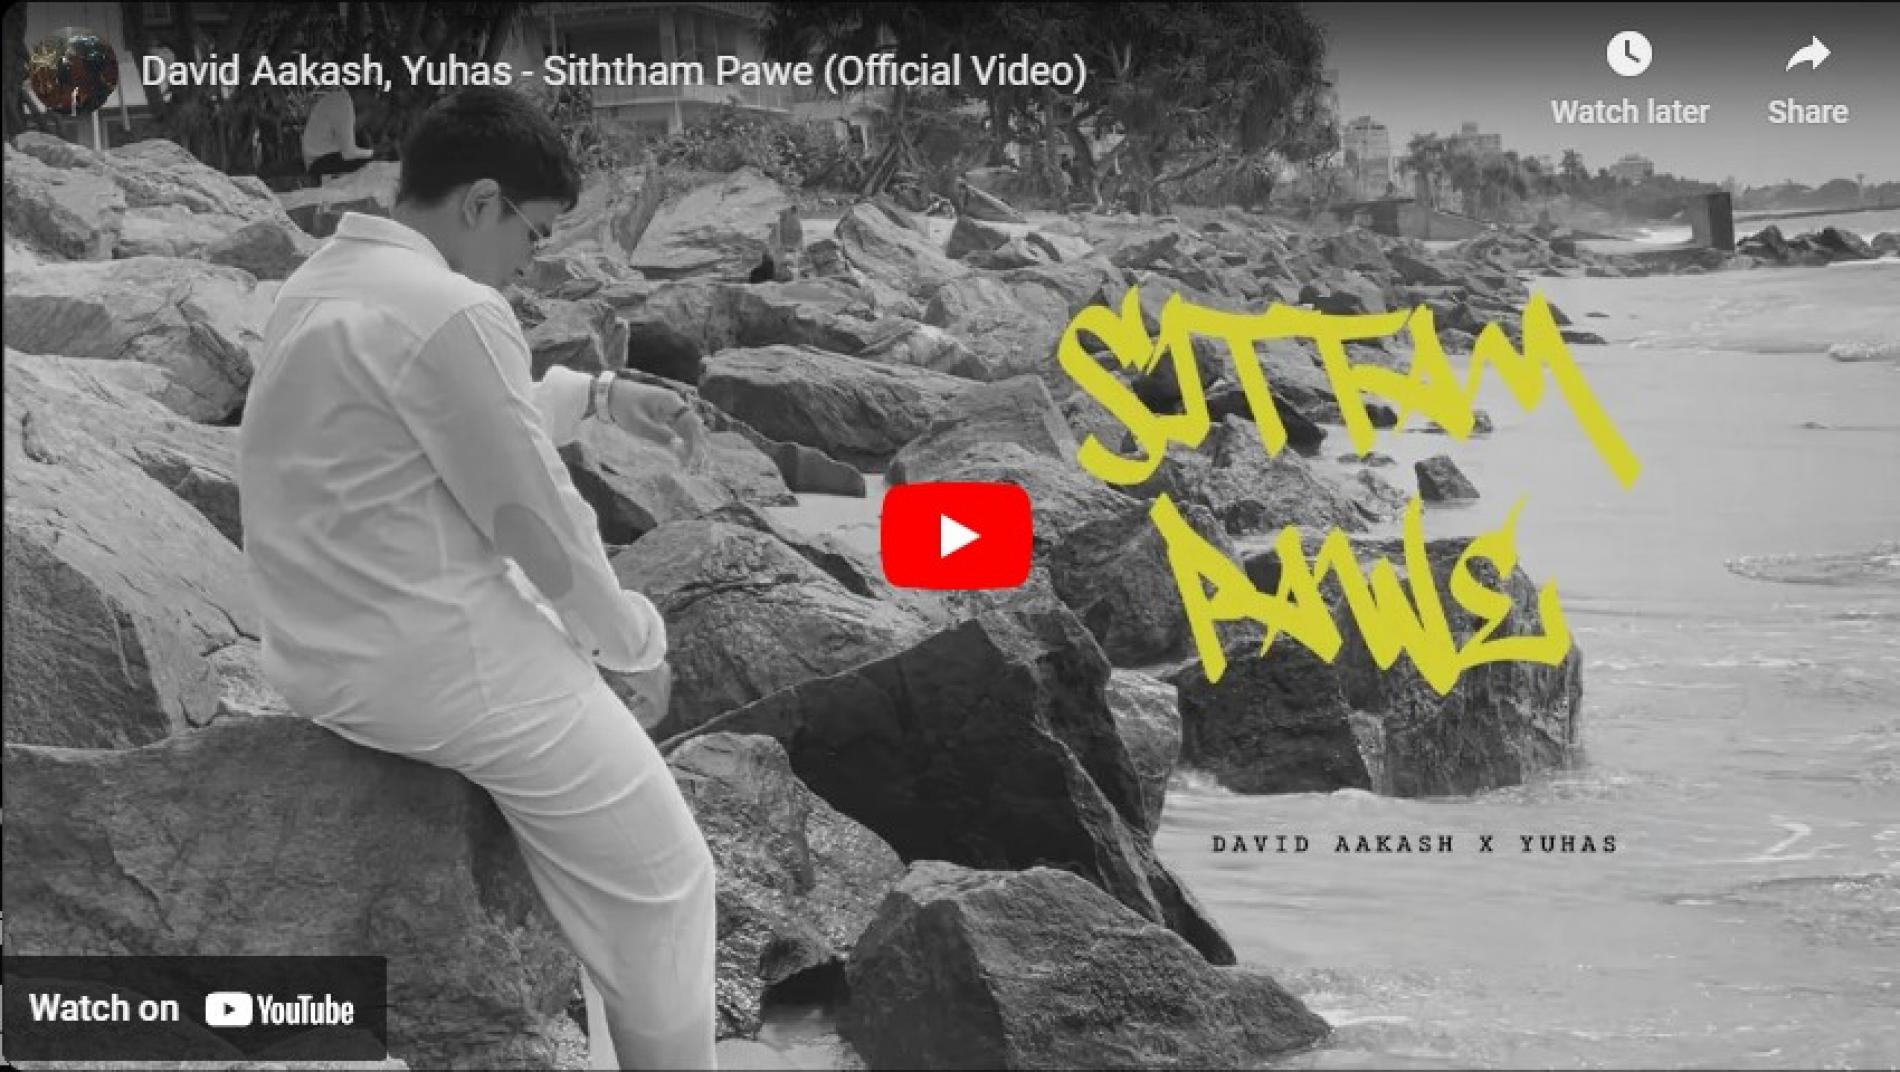 New Music : David Aakash, Yuhas – Siththam Pawe (Official Video)